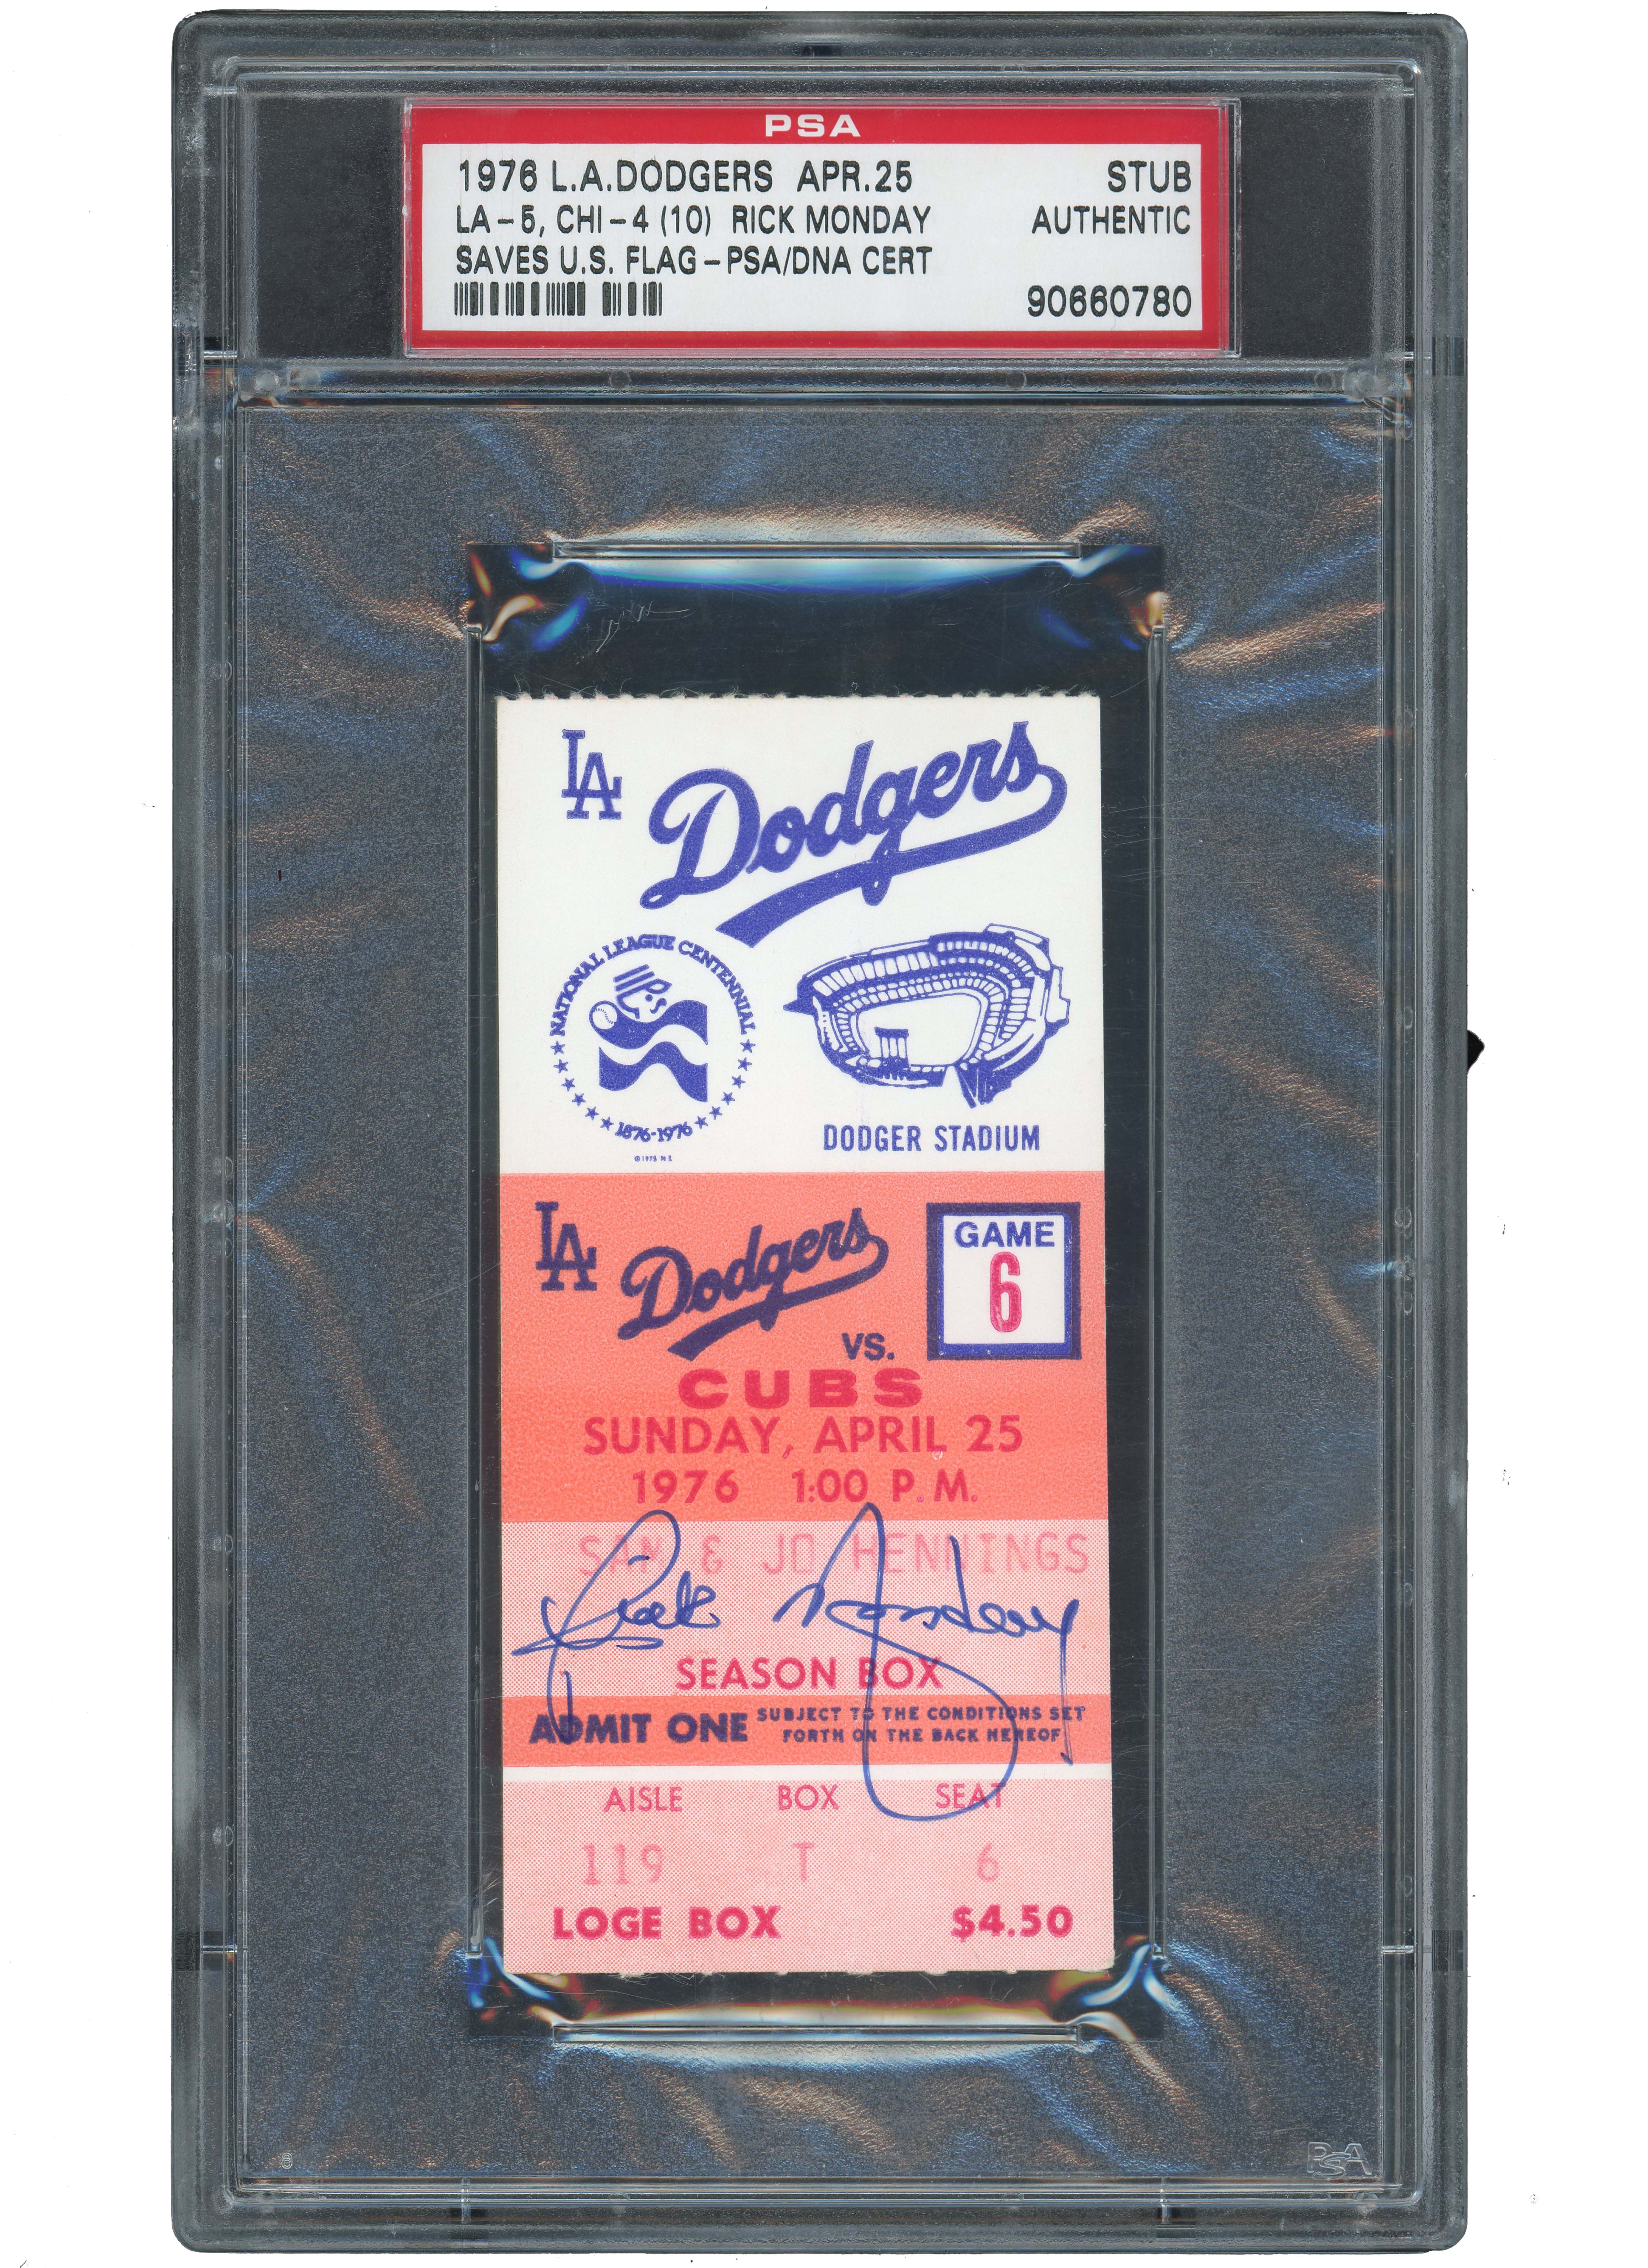 Lot Detail - HISTORIC APRIL 25, 1976 RICK MONDAY AUTOGRAPHED DODGERS VS.  CUBS TICKET STUB - MONDAY SAVES U.S. FLAG FROM BURNING! - PSA AUTHENTIC &  PSA/DNA AUTH. (1 OF 2 SIGNED IN POP REPORT)